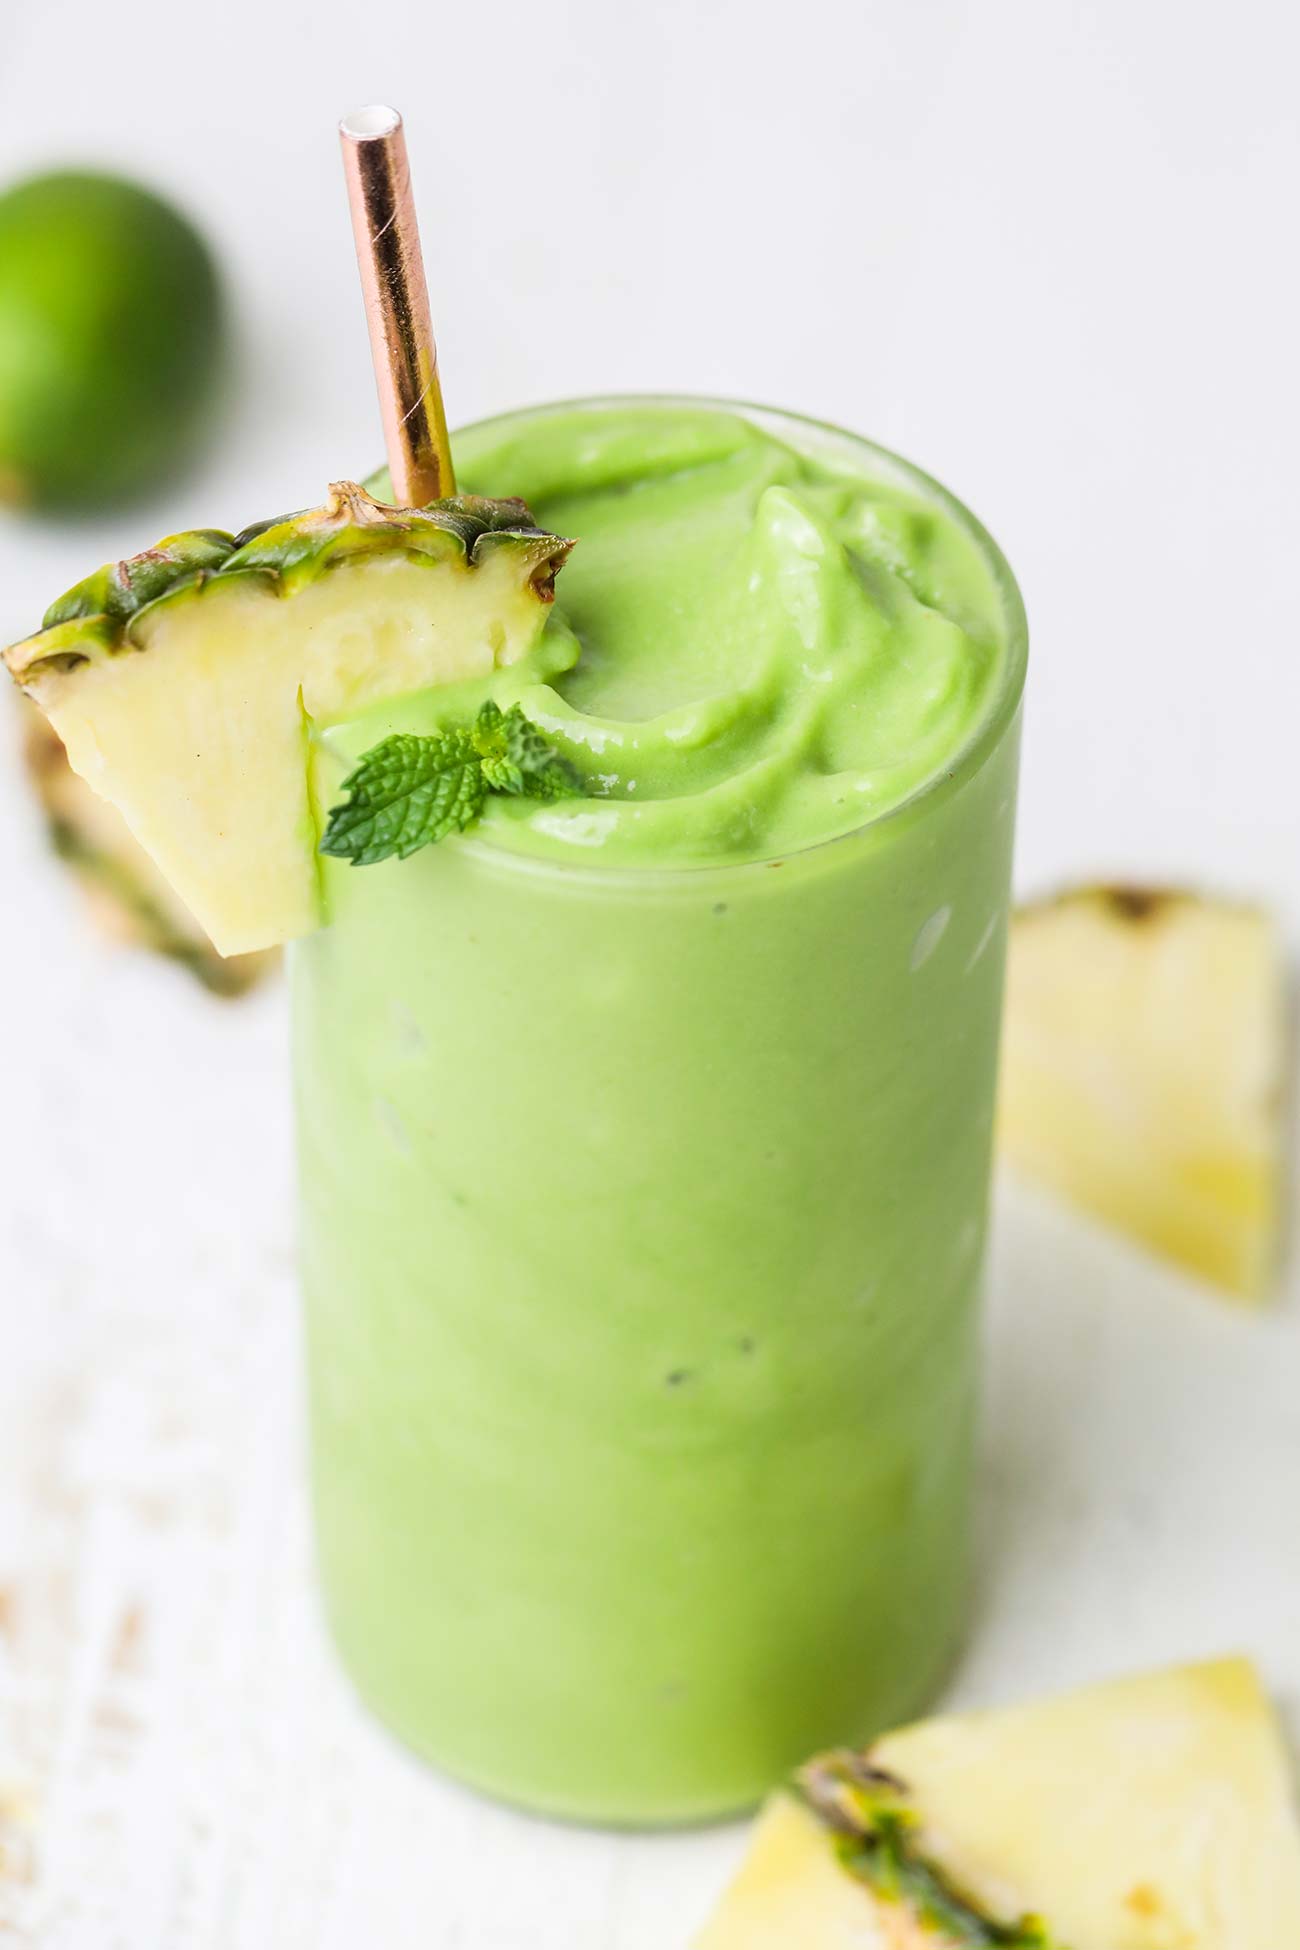 A thick, vibrant green smoothie in a glass garnished with a pineapple wedge.